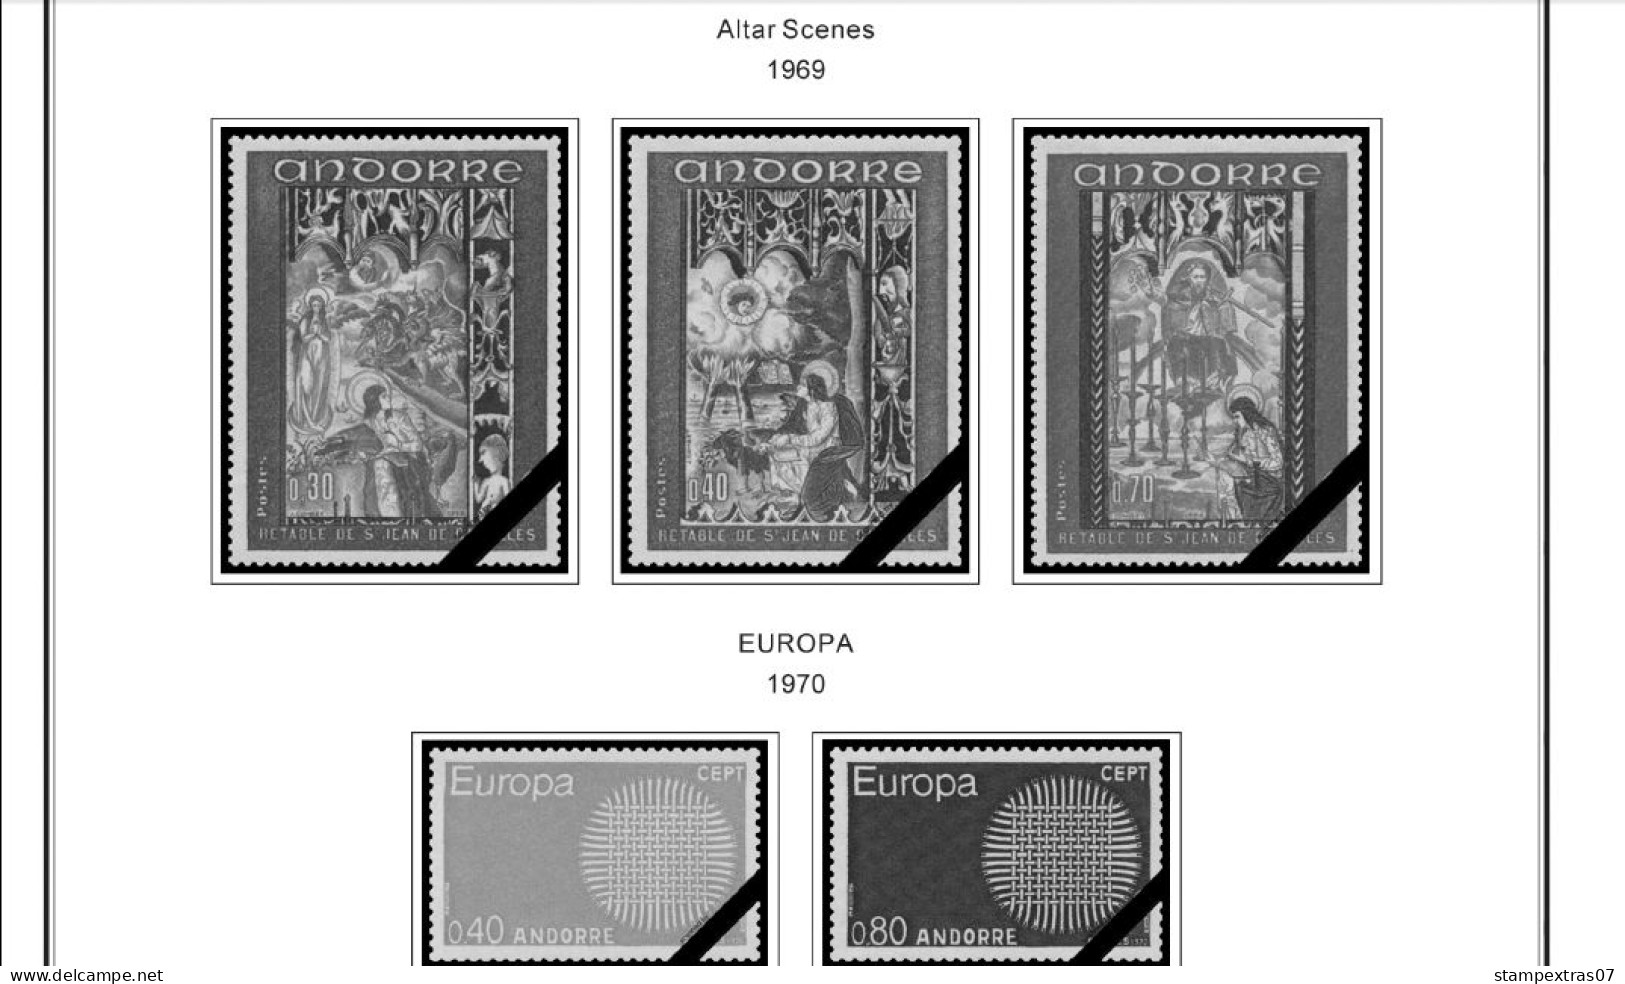 ANDORRA [FR. + SP.] 1875-2020 STAMP ALBUM PAGES (166 b&w illustrated pages)